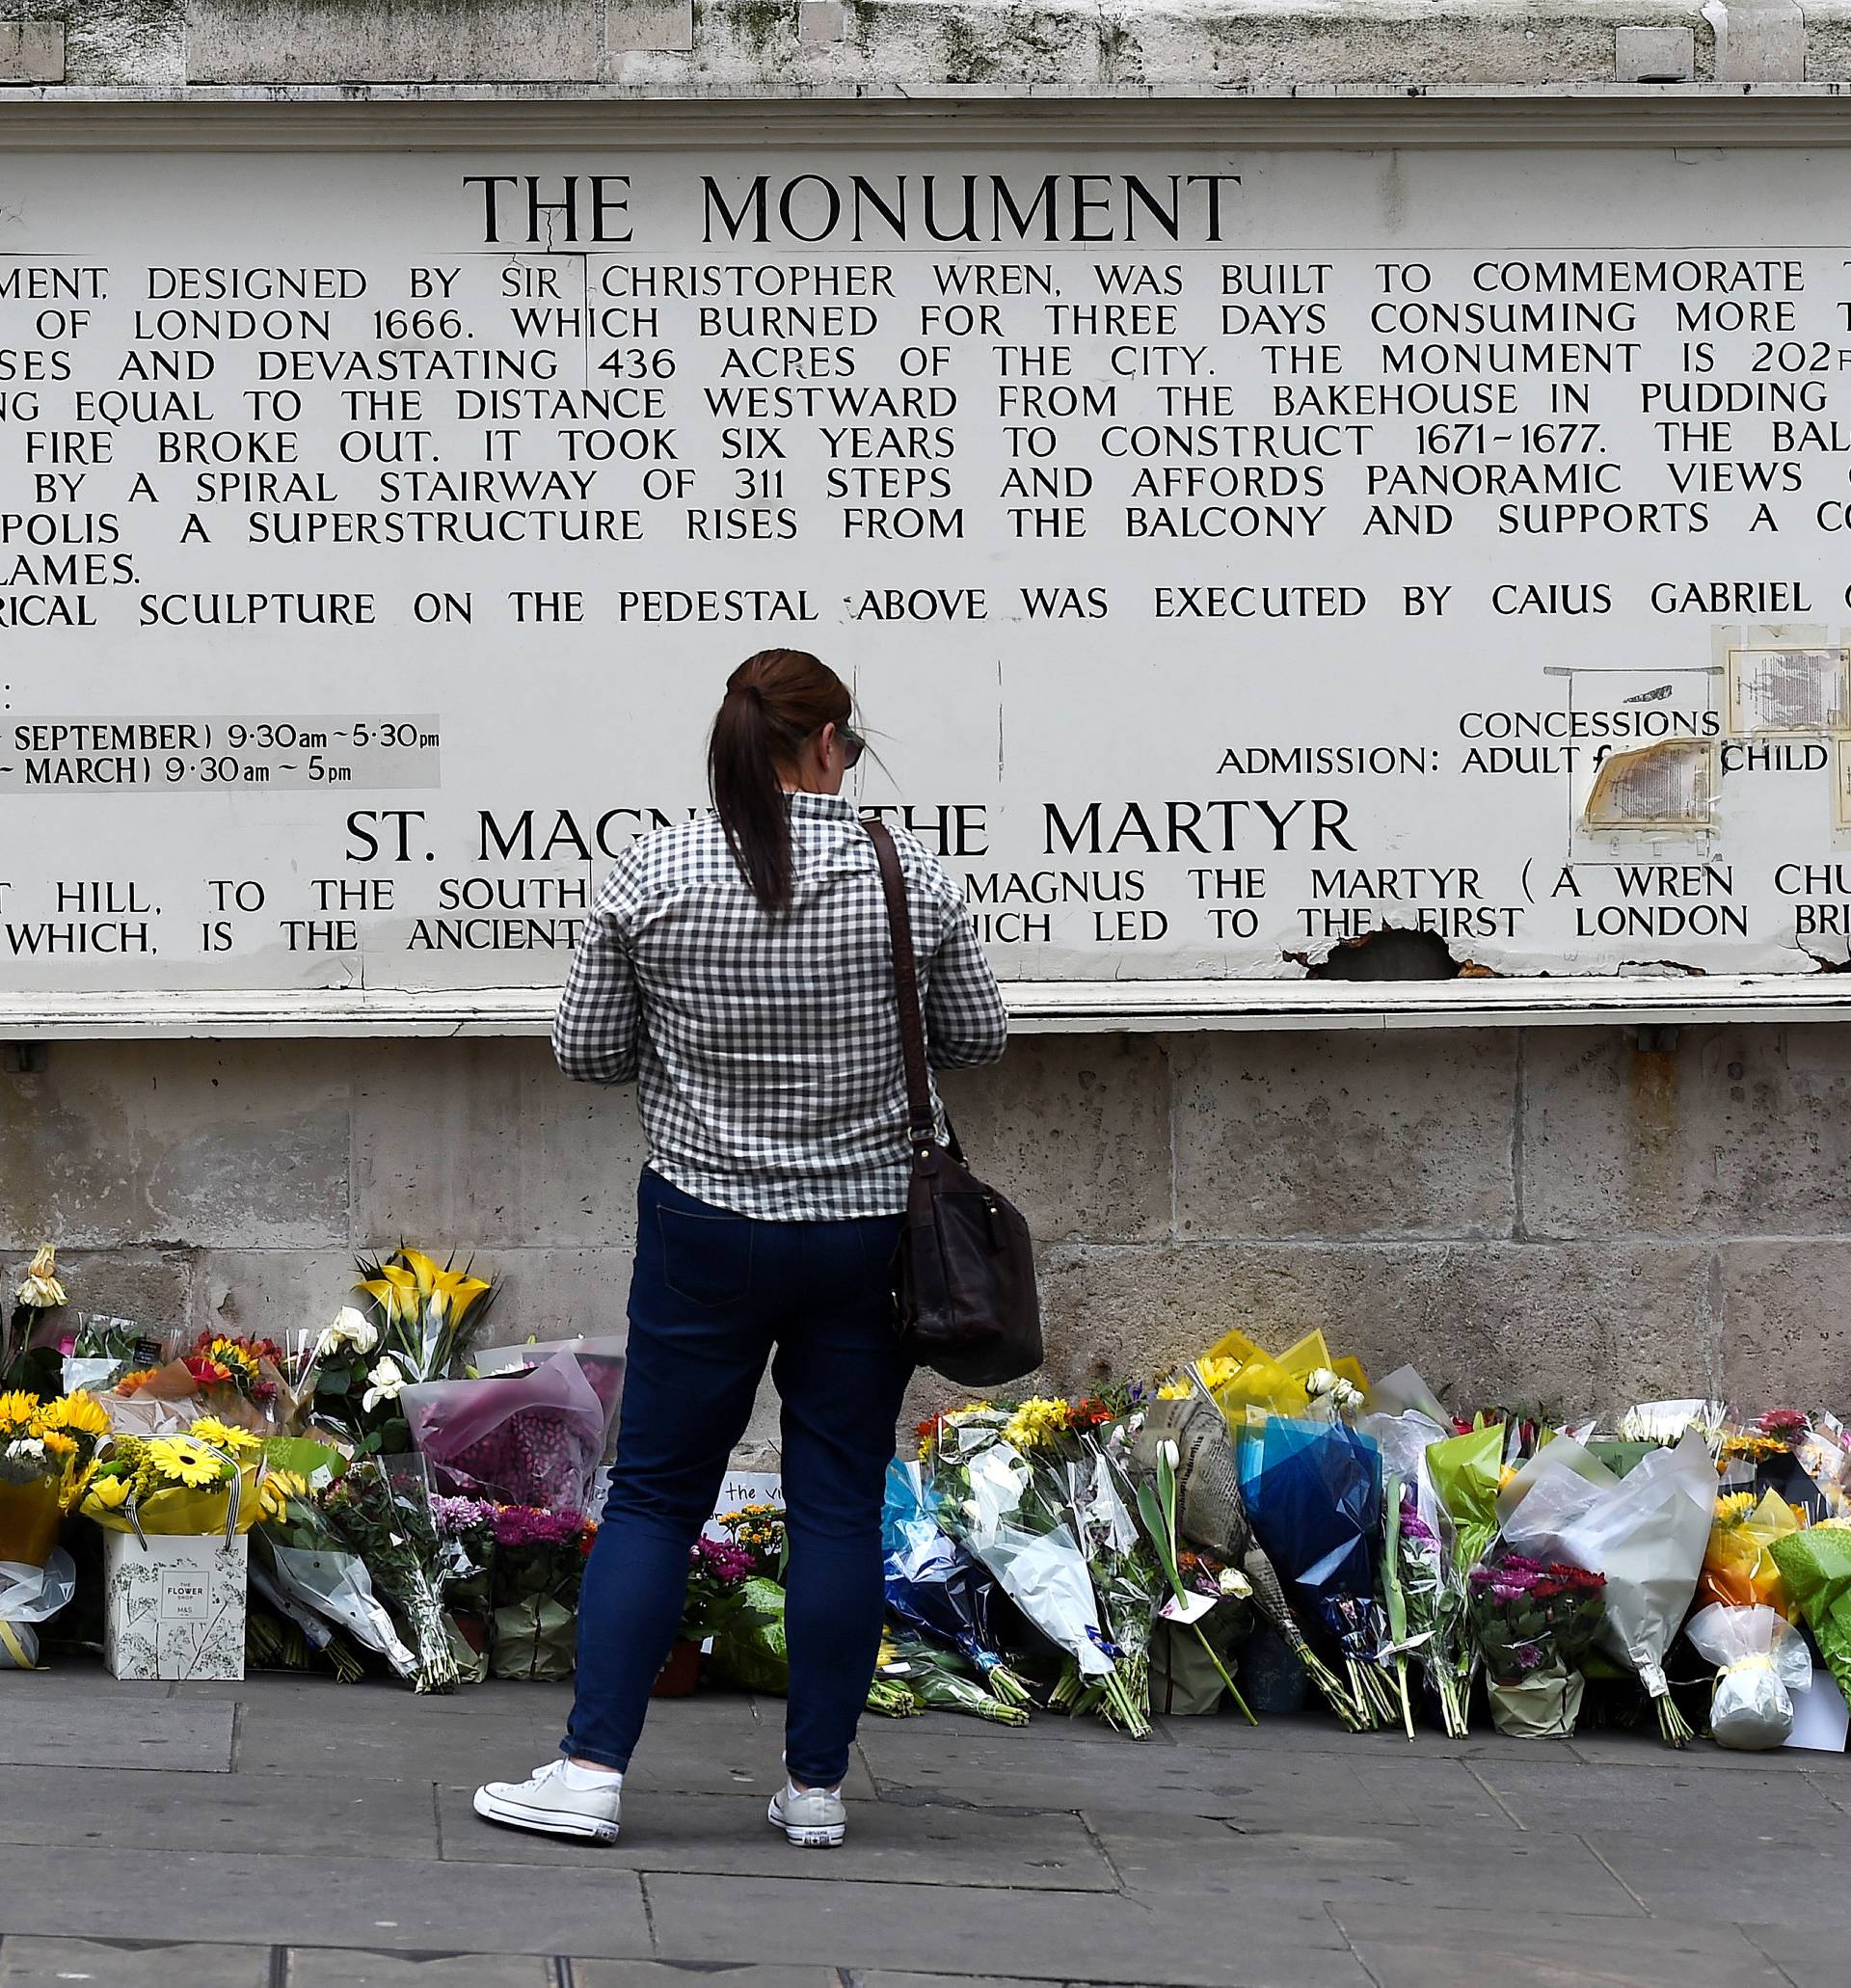 A woman observes flowers left along the base of the Monument to the Great Fire of London near London Bridge after an attack on the bridge and nearby Borough Market left 7 dead and dozens injured, in London